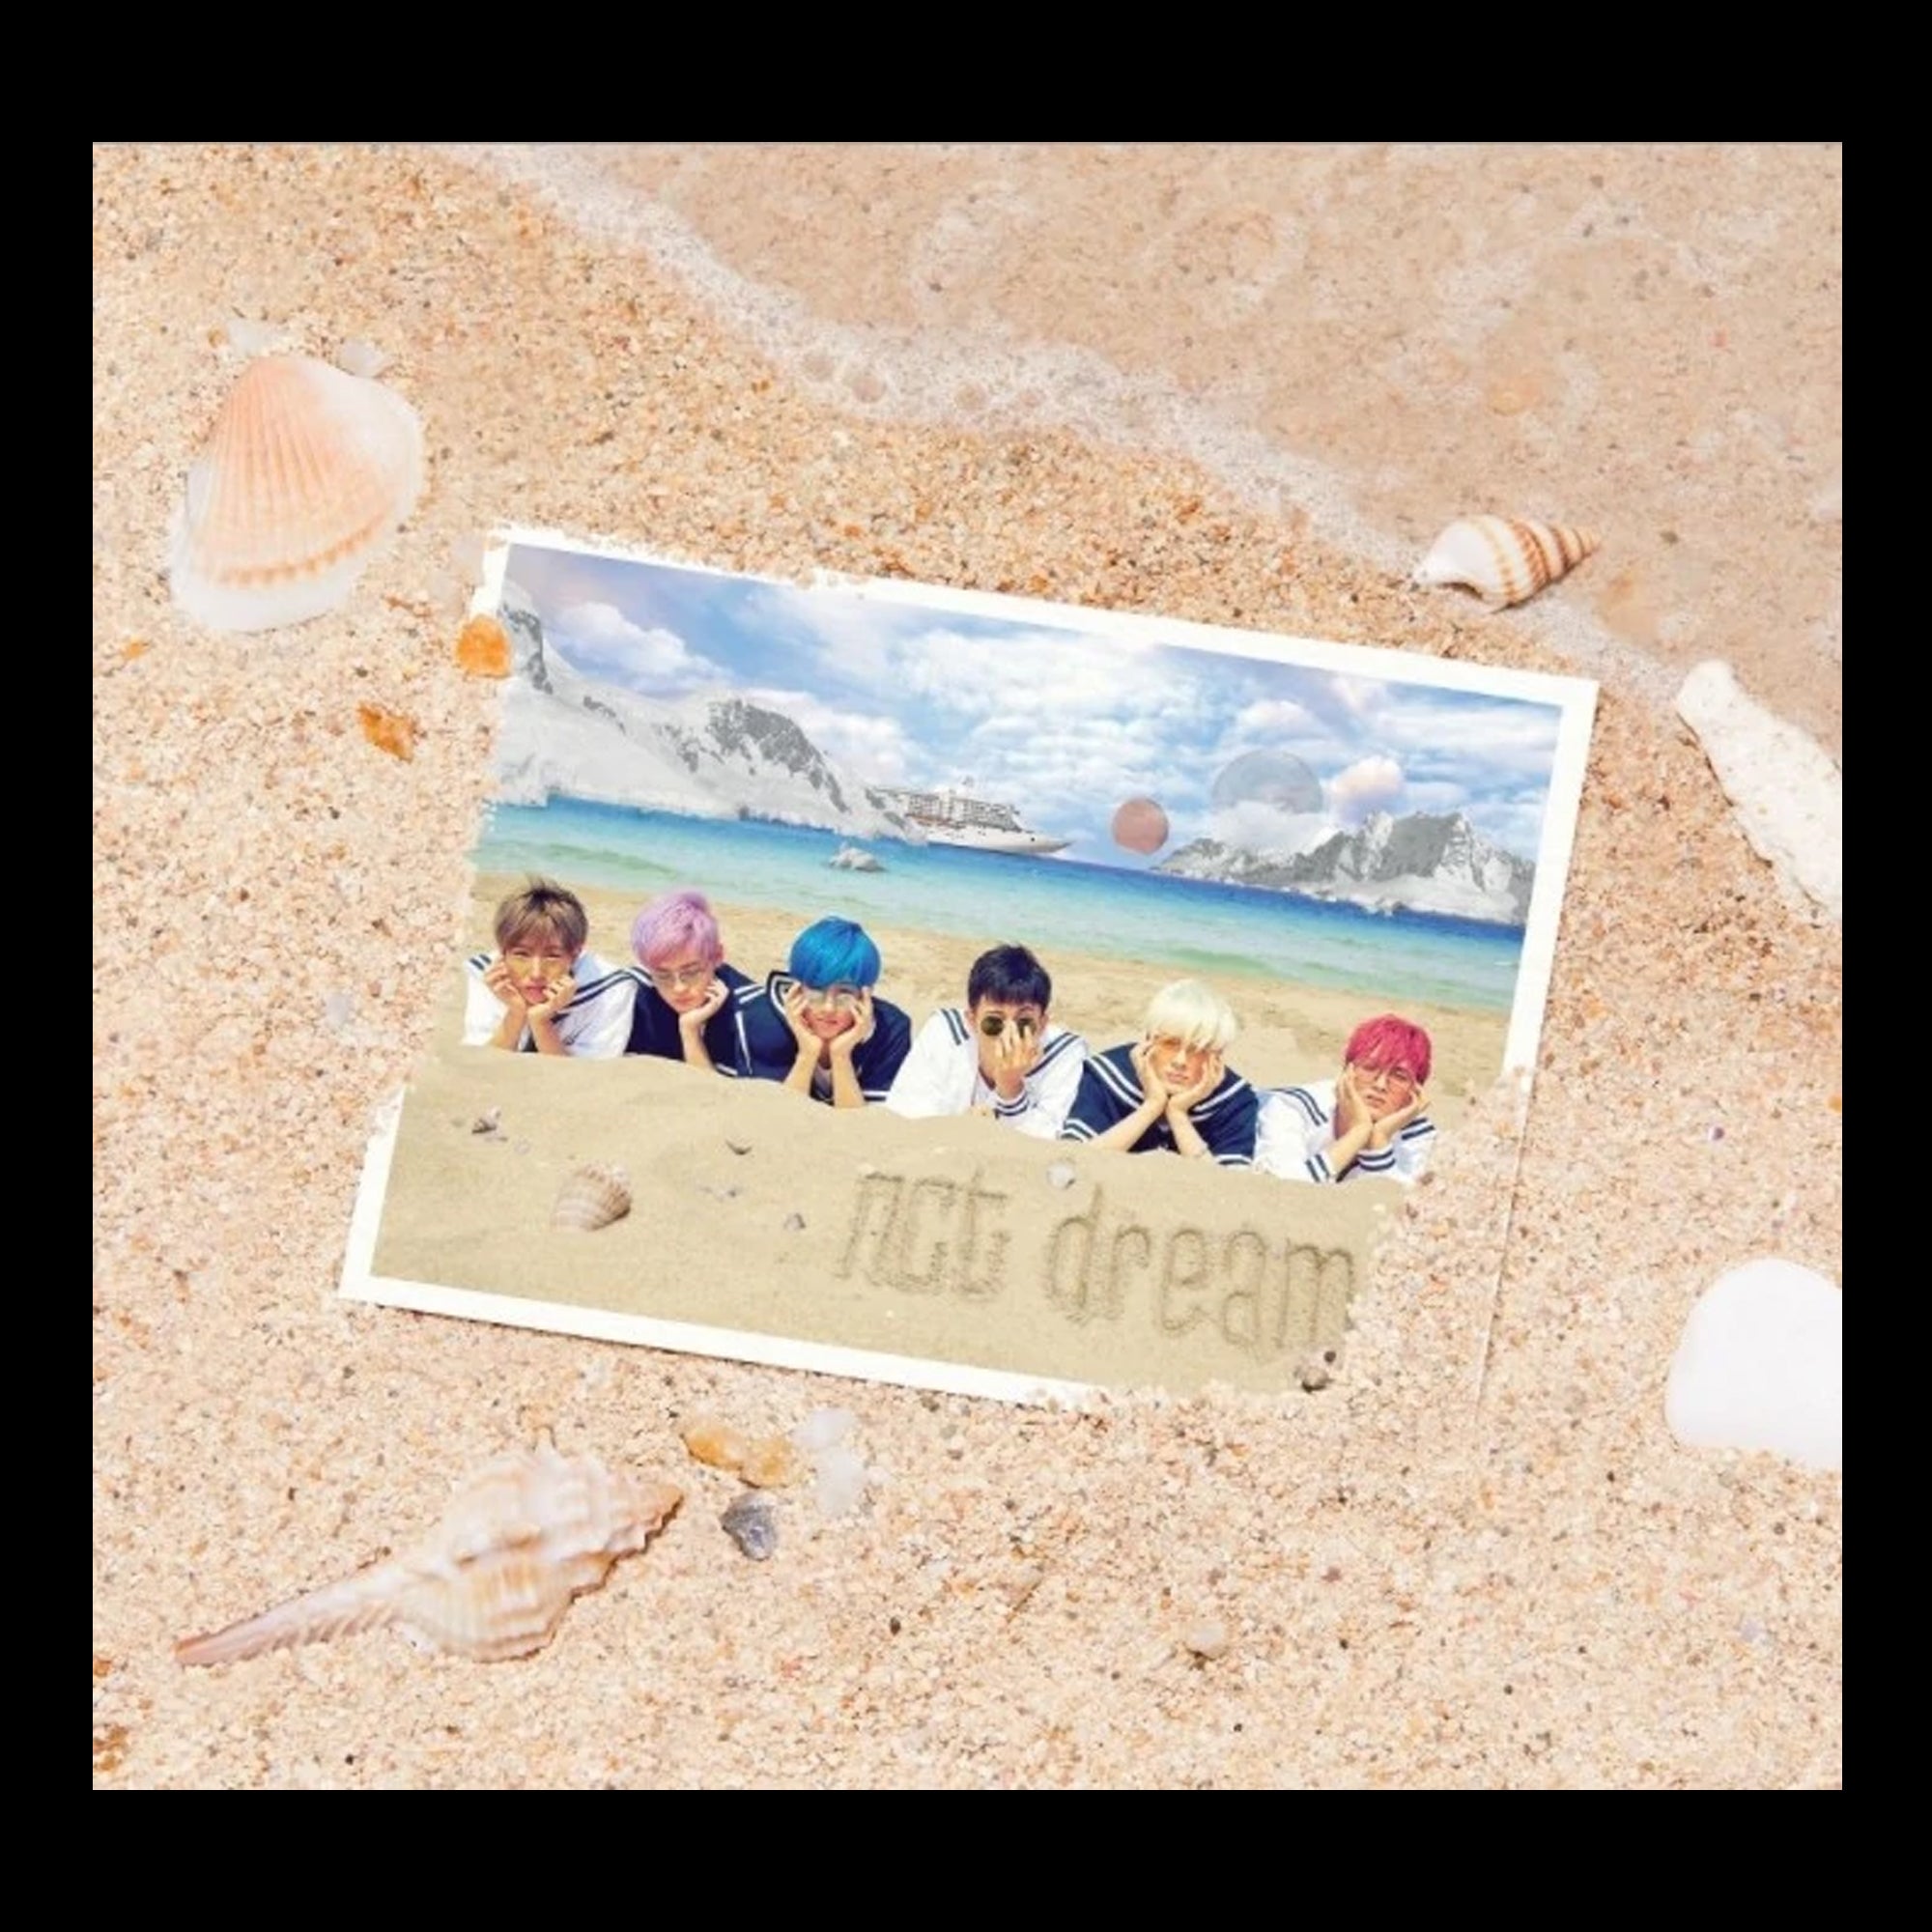 NCT DREAM - We Young